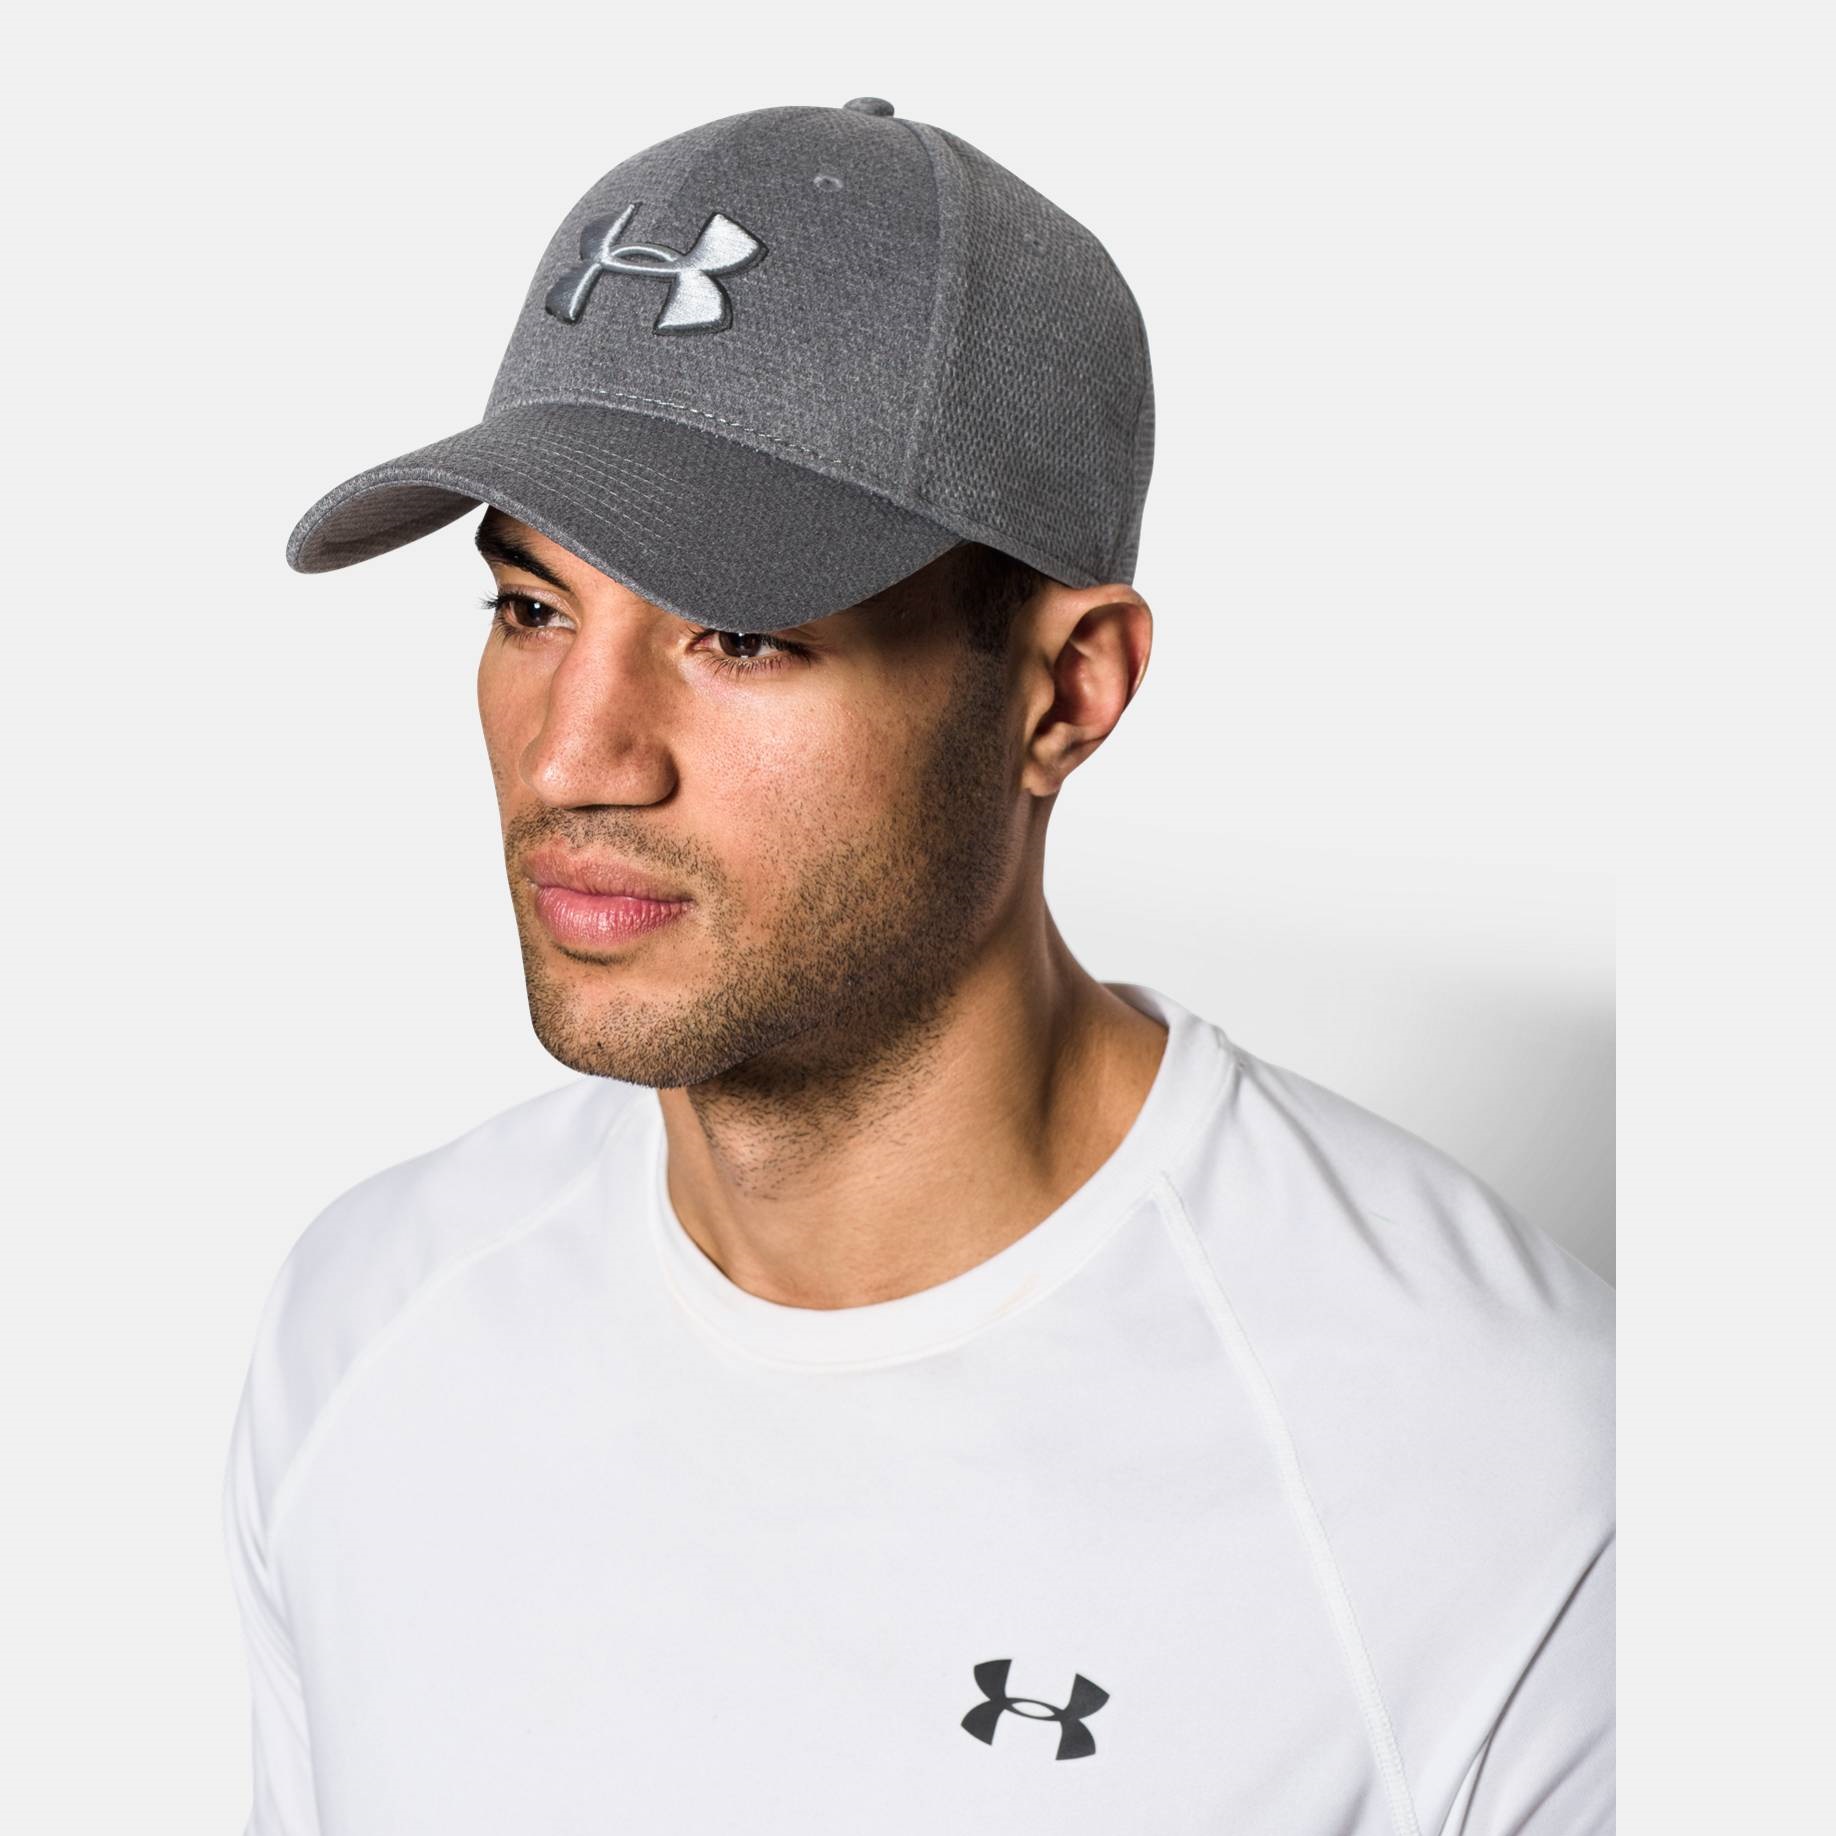  -  under armour Heatered Blitzing Cap 3151